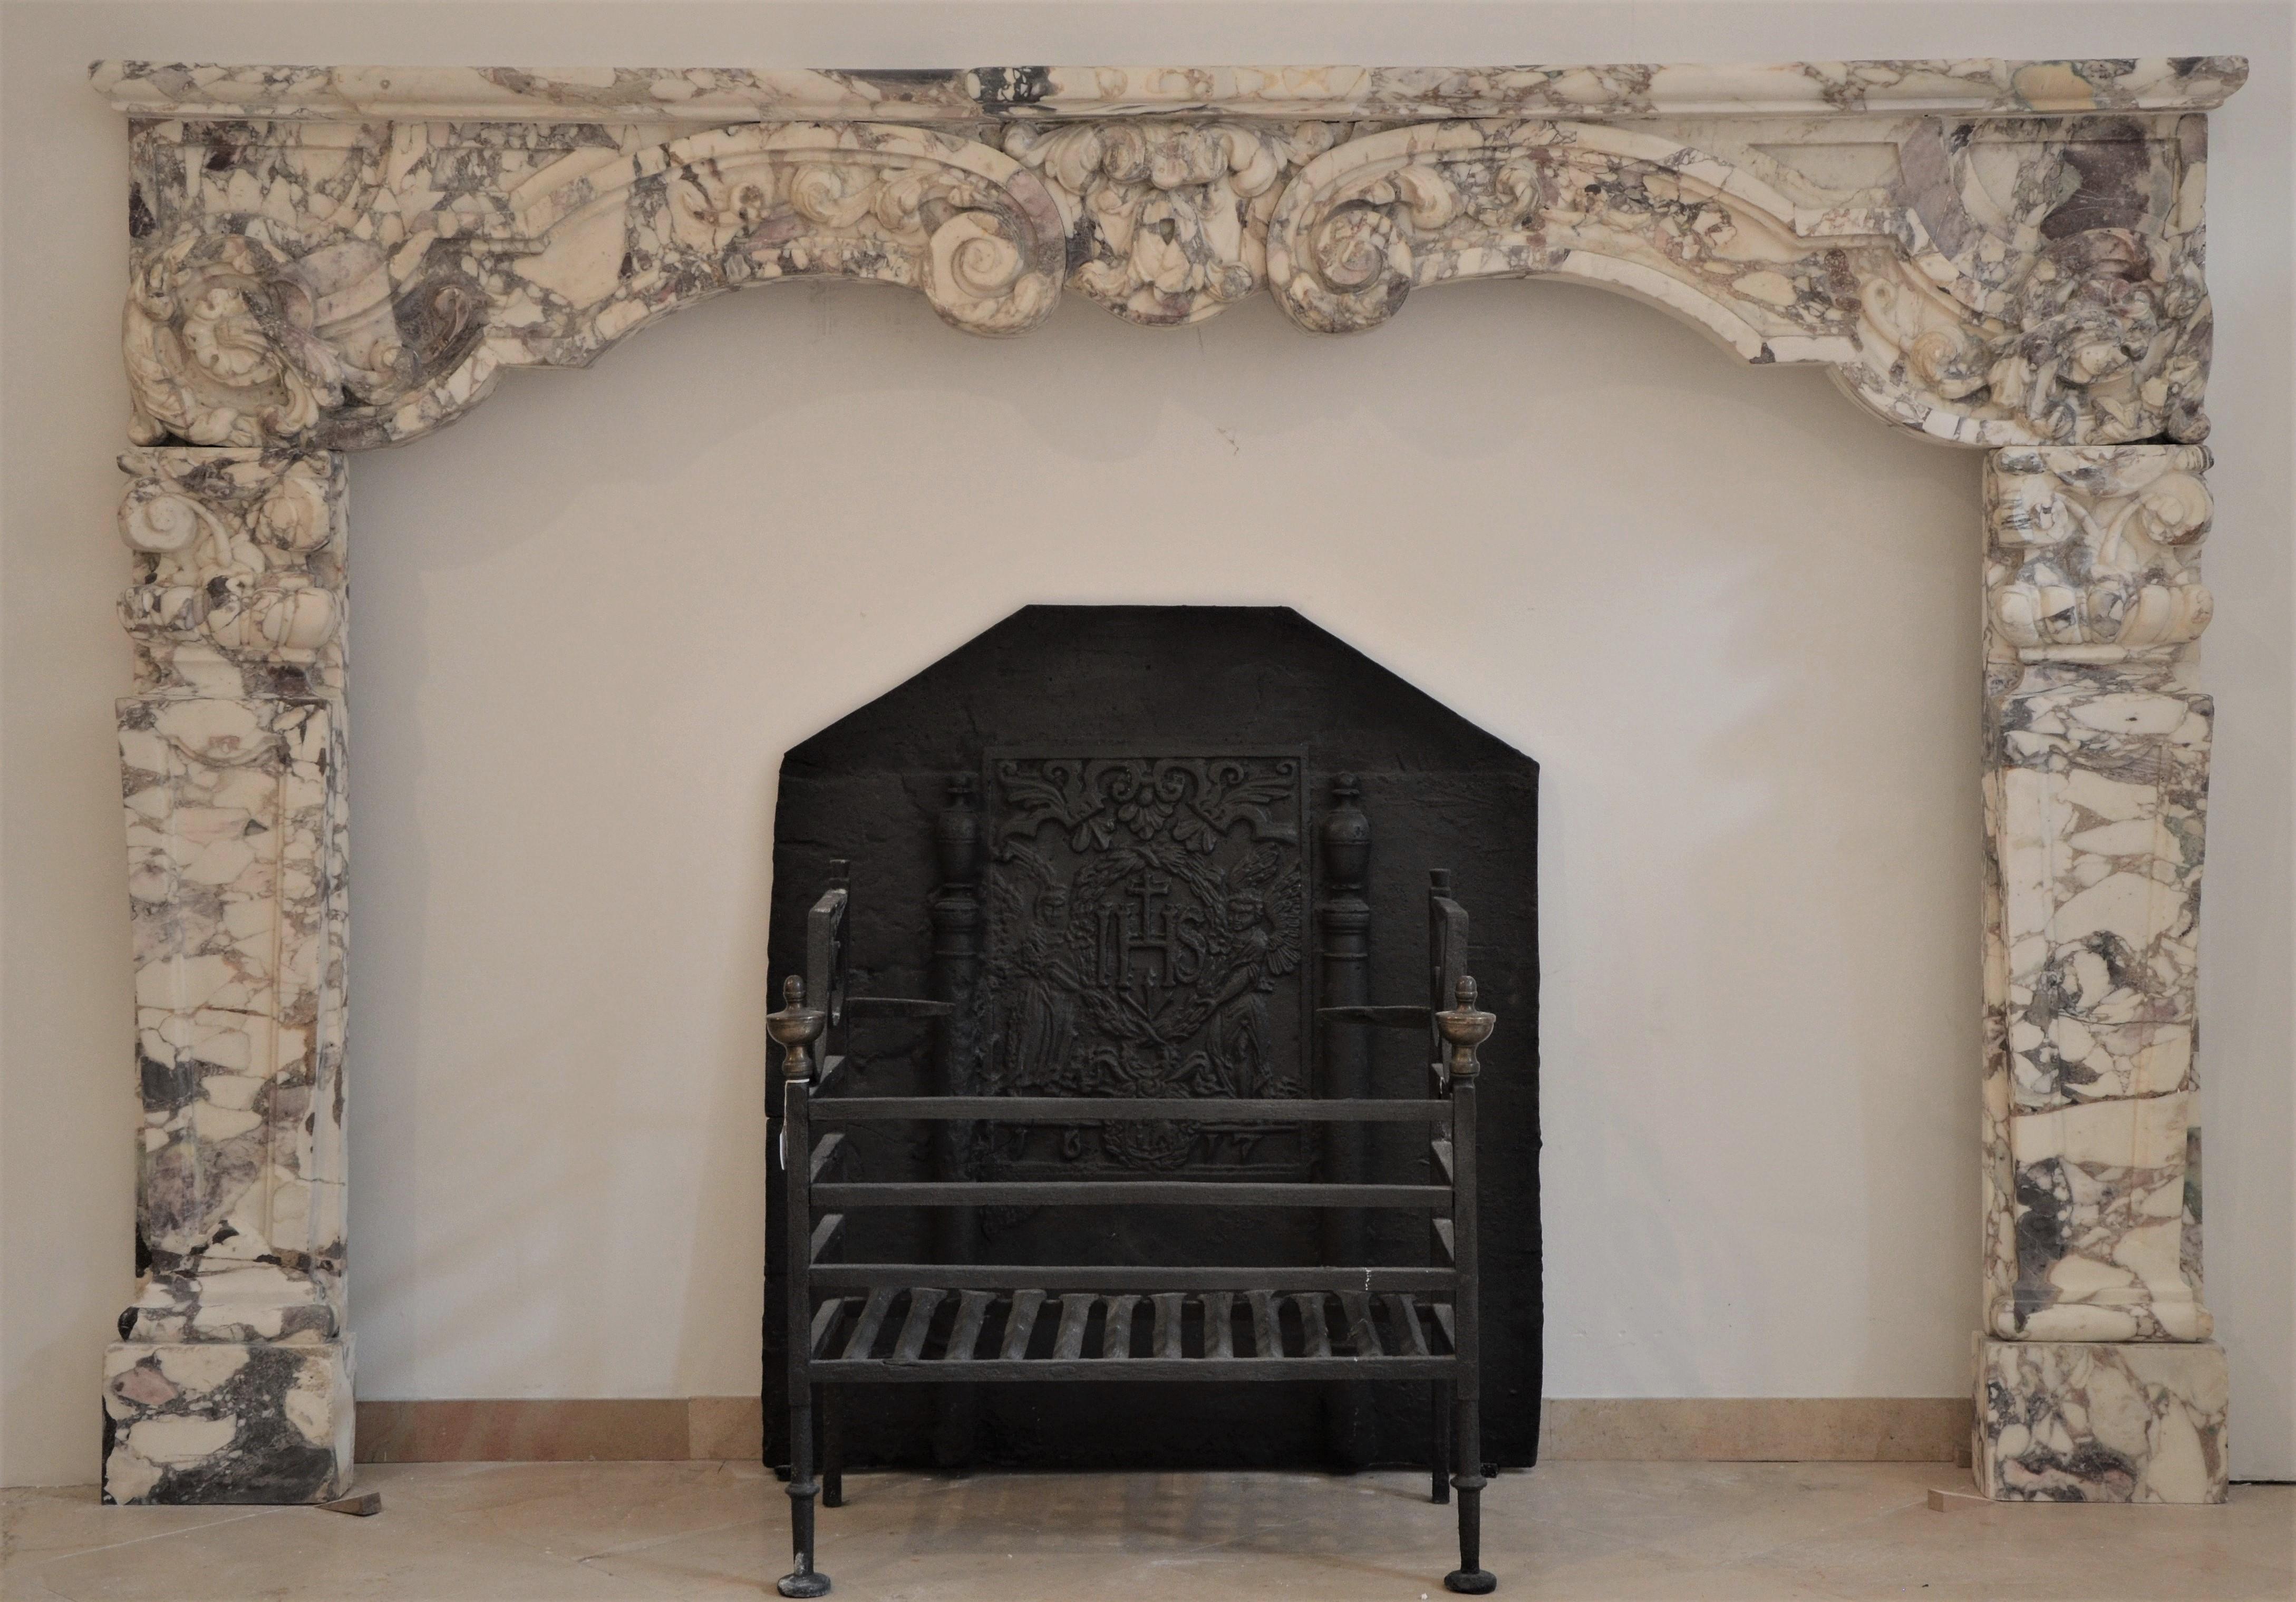 Unique and regal late 17th century Dutch Louis XIV fireplace mantel.
This rare and large mantelpiece is executed in the finest Italian breche violet marble.

The boldly carved central keystone is flanked by beautifully scrolled floral decorations